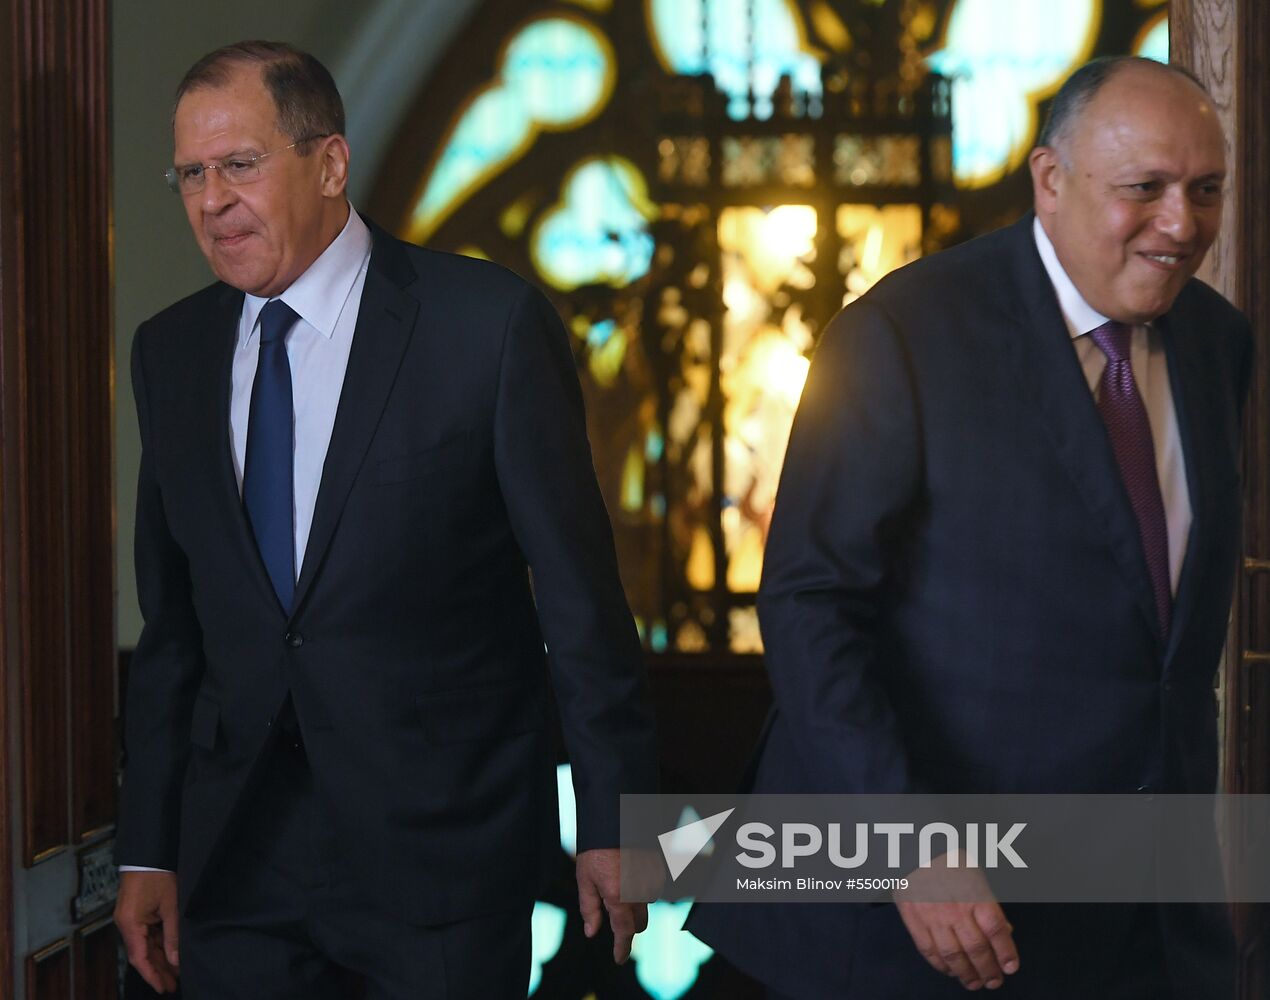 Foreign Minister Sergei Lavrov meets with his Egyptian counterpart Sameh Shoukry